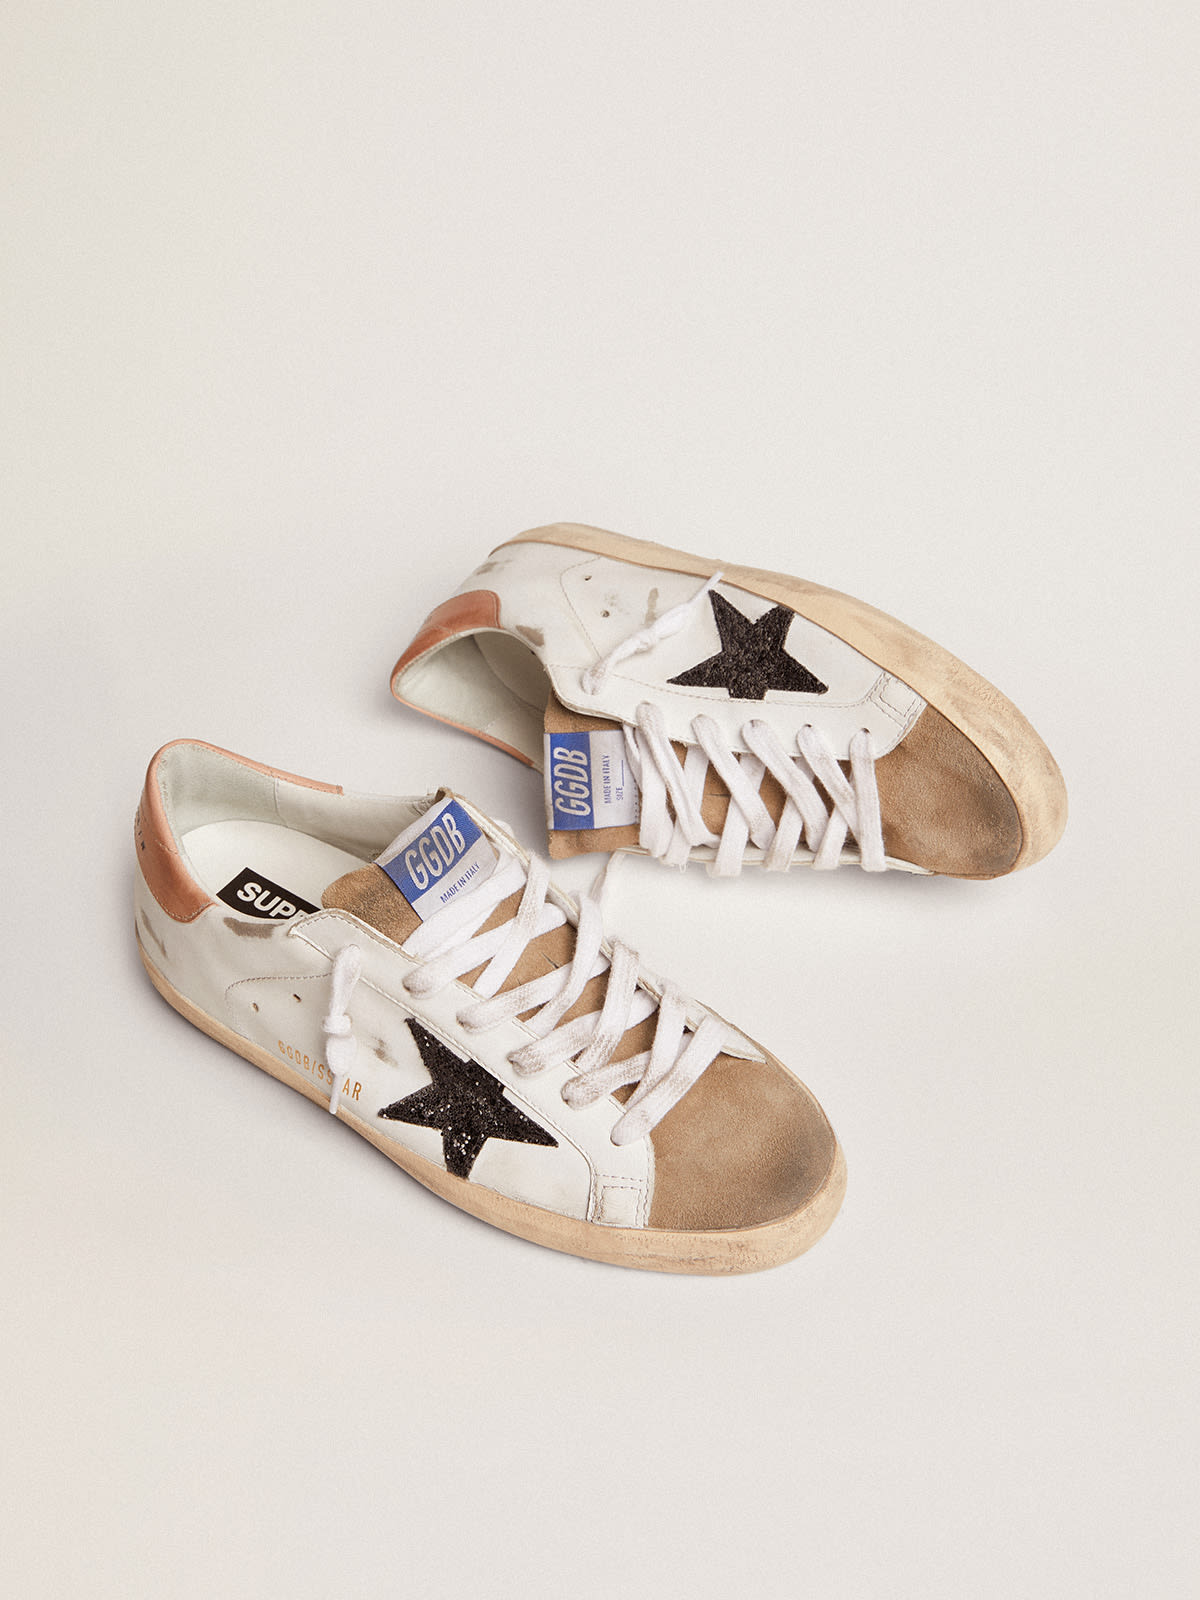 Golden Goose - Women's Super-Star with black glitter star and pink heel tab in 